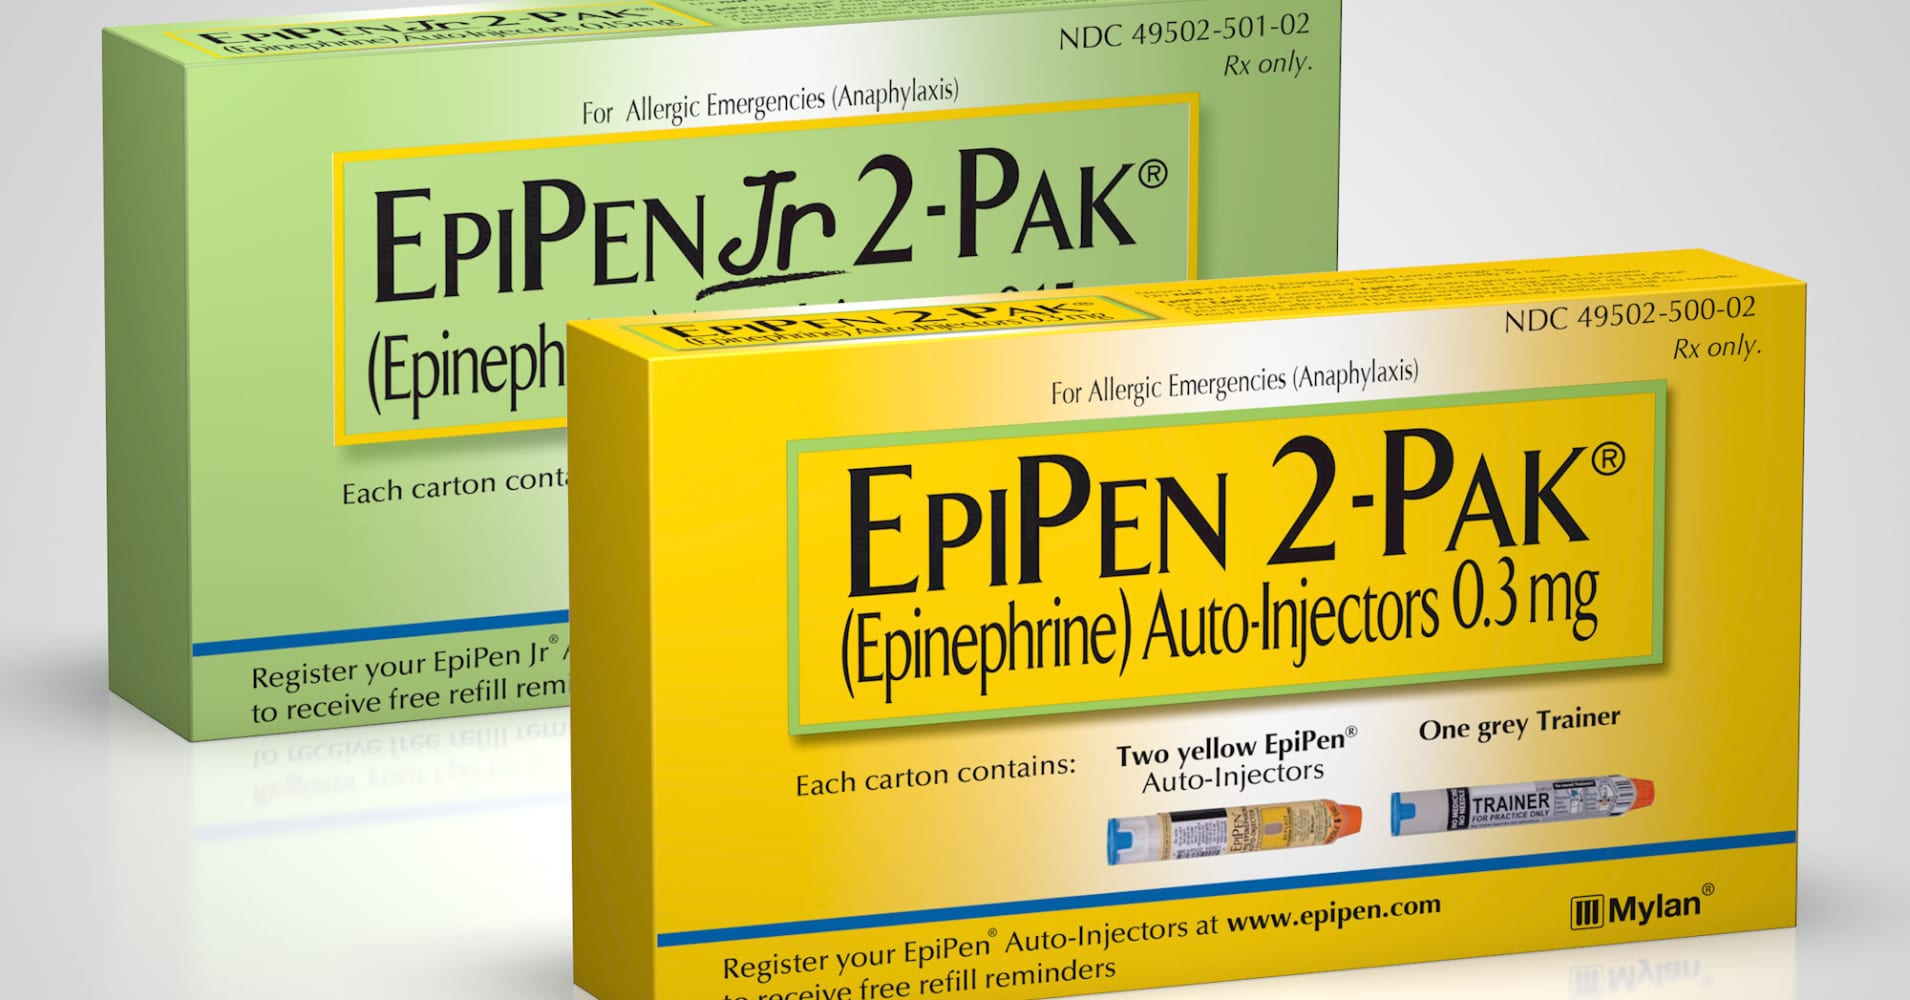 mylan-expands-epipen-cost-cutting-programs-after-charges-of-price-gouging